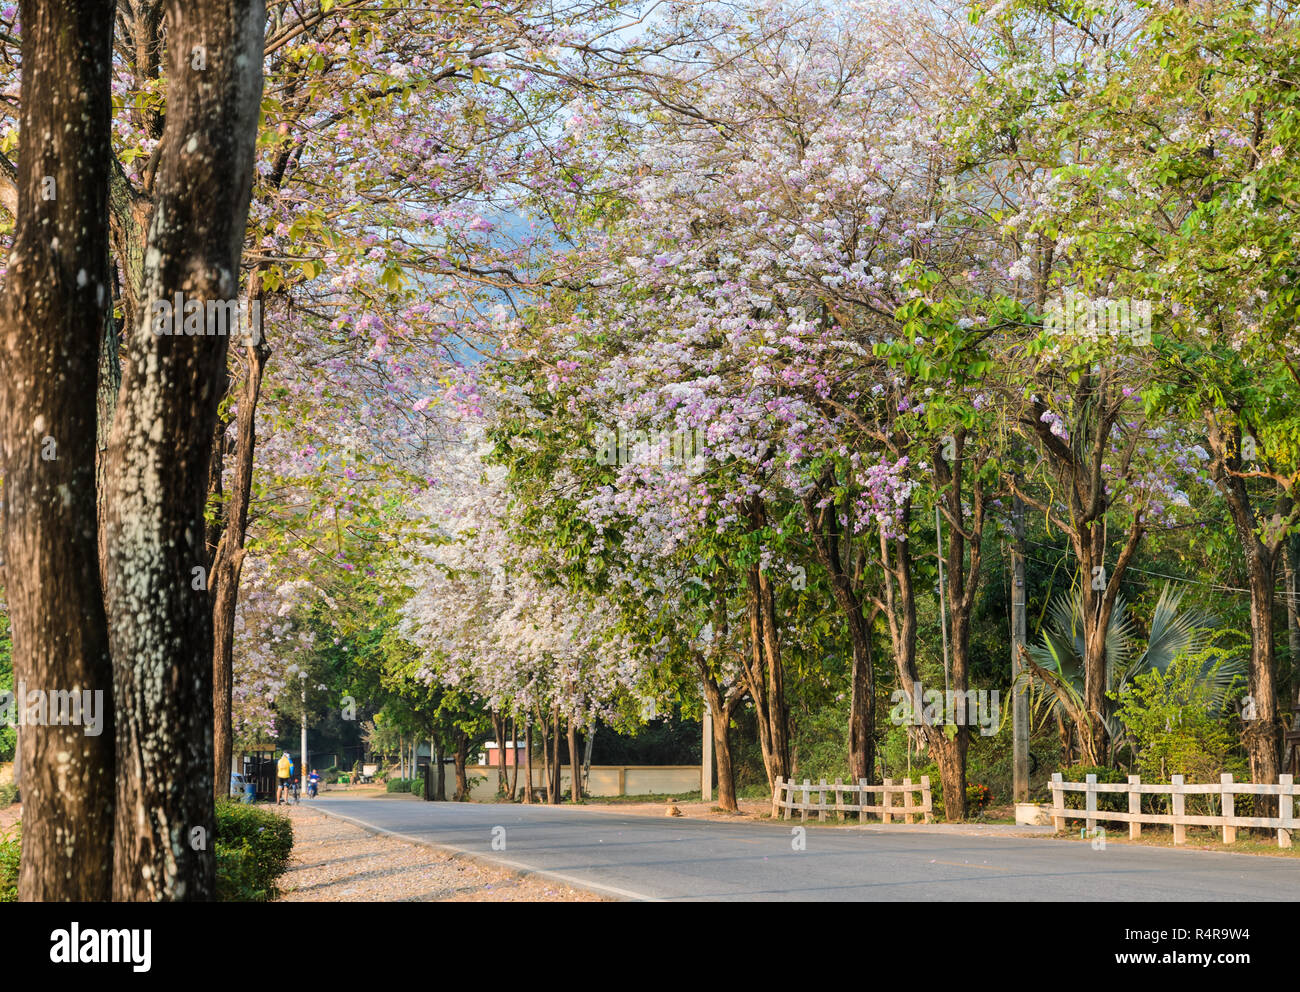 Road along with flower trees in full bloom Stock Photo